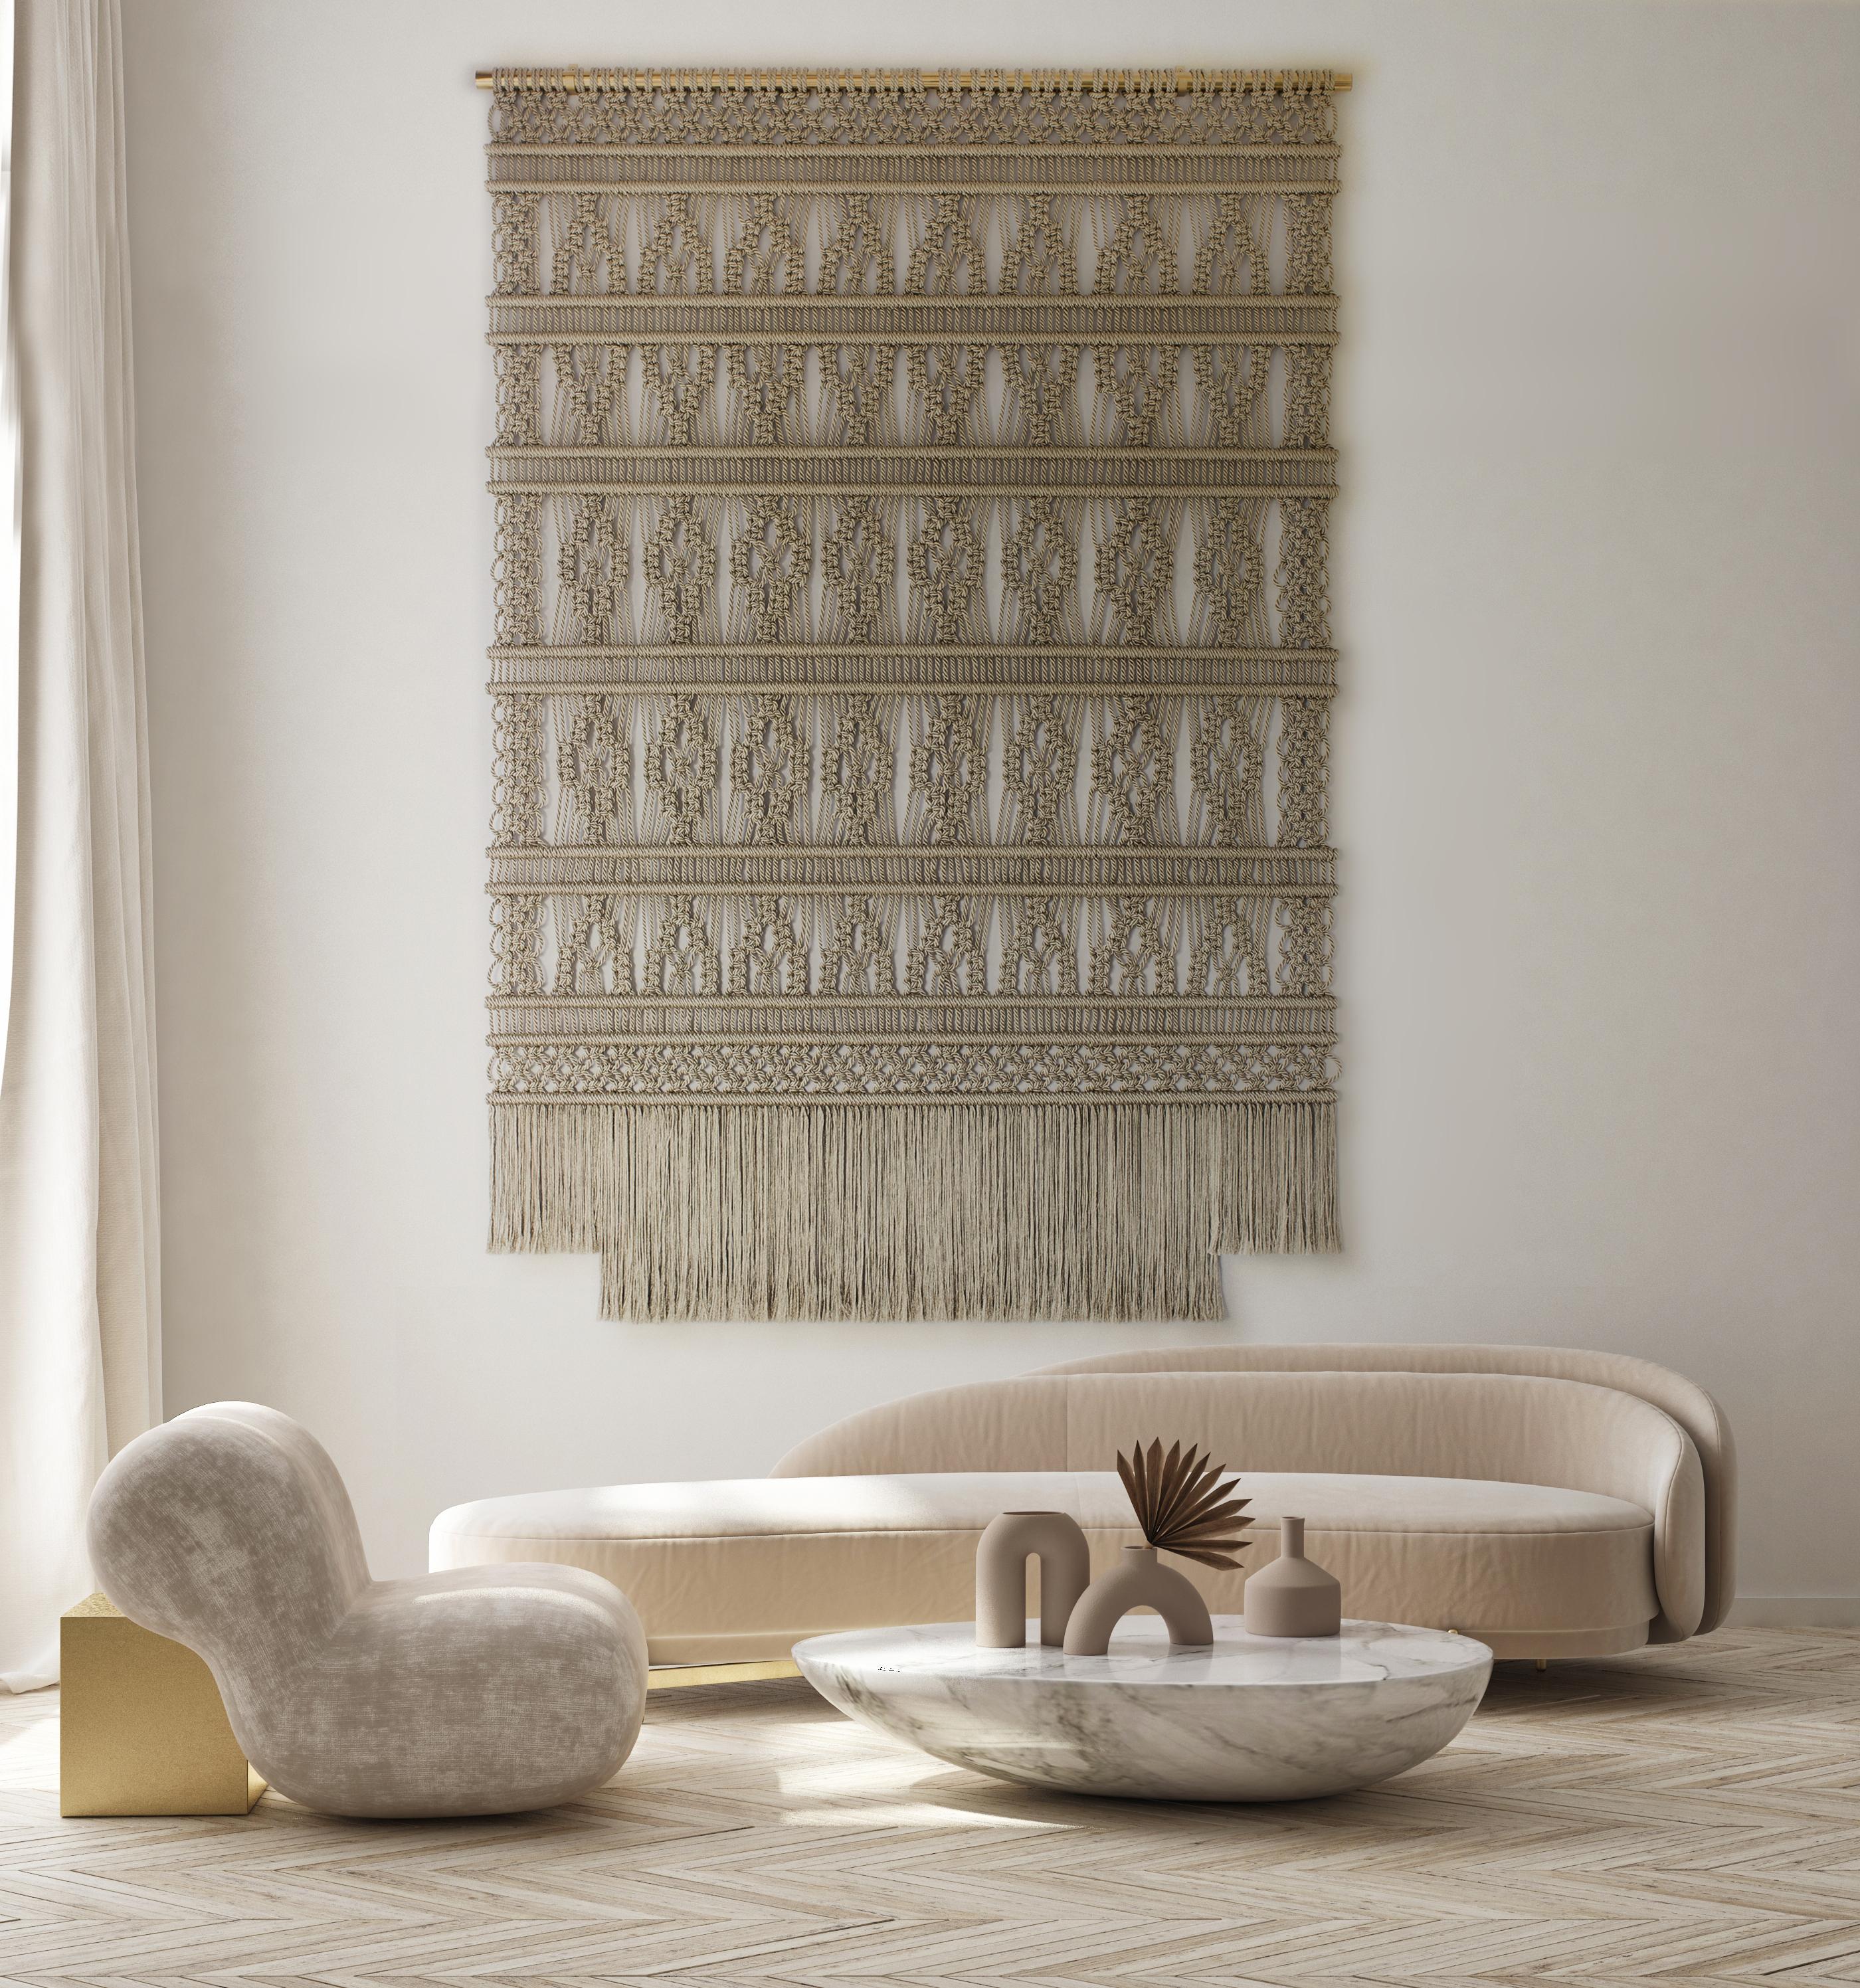 Gold Rope Wall tapestry hand knotted
Size on photo 180cm x 265cm
The size can be adjusted to your wishes
The Macrame wallhanging is handmade by Milla Novo
Lead time 4 months.

Milla Novo is an artist based in the Netherlands. She creates